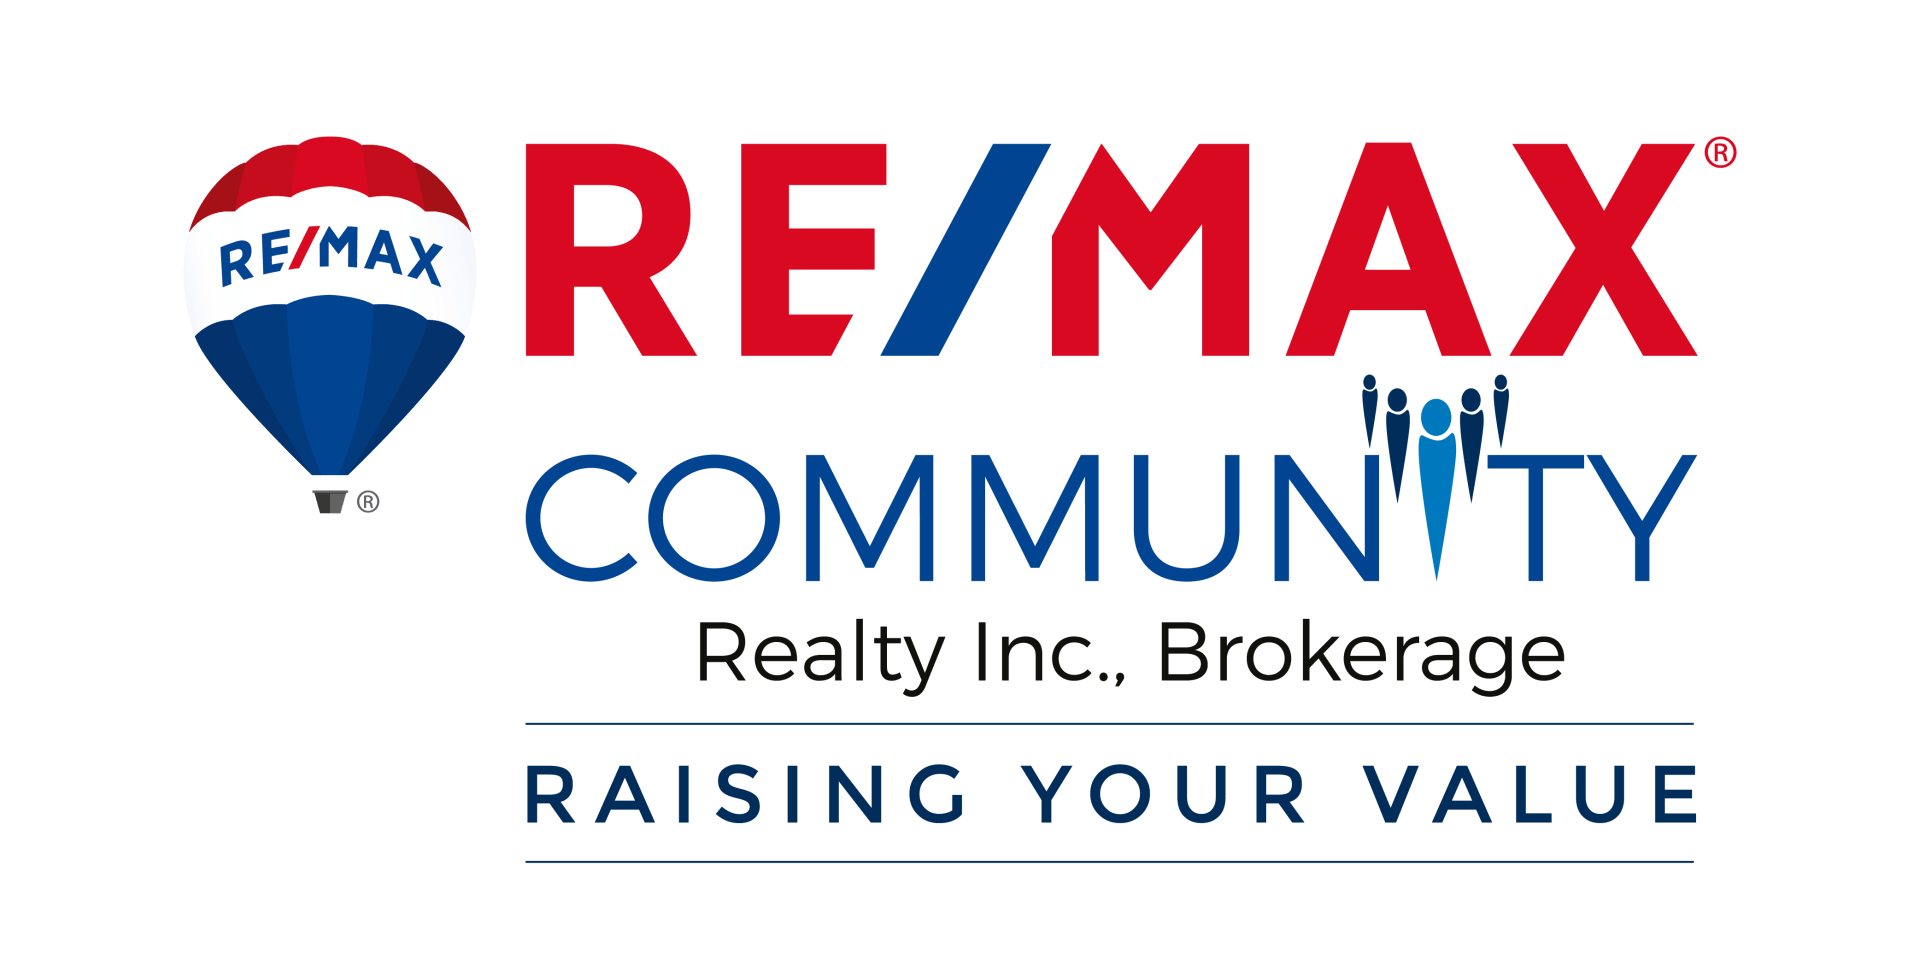 RE/MAX real estate agents